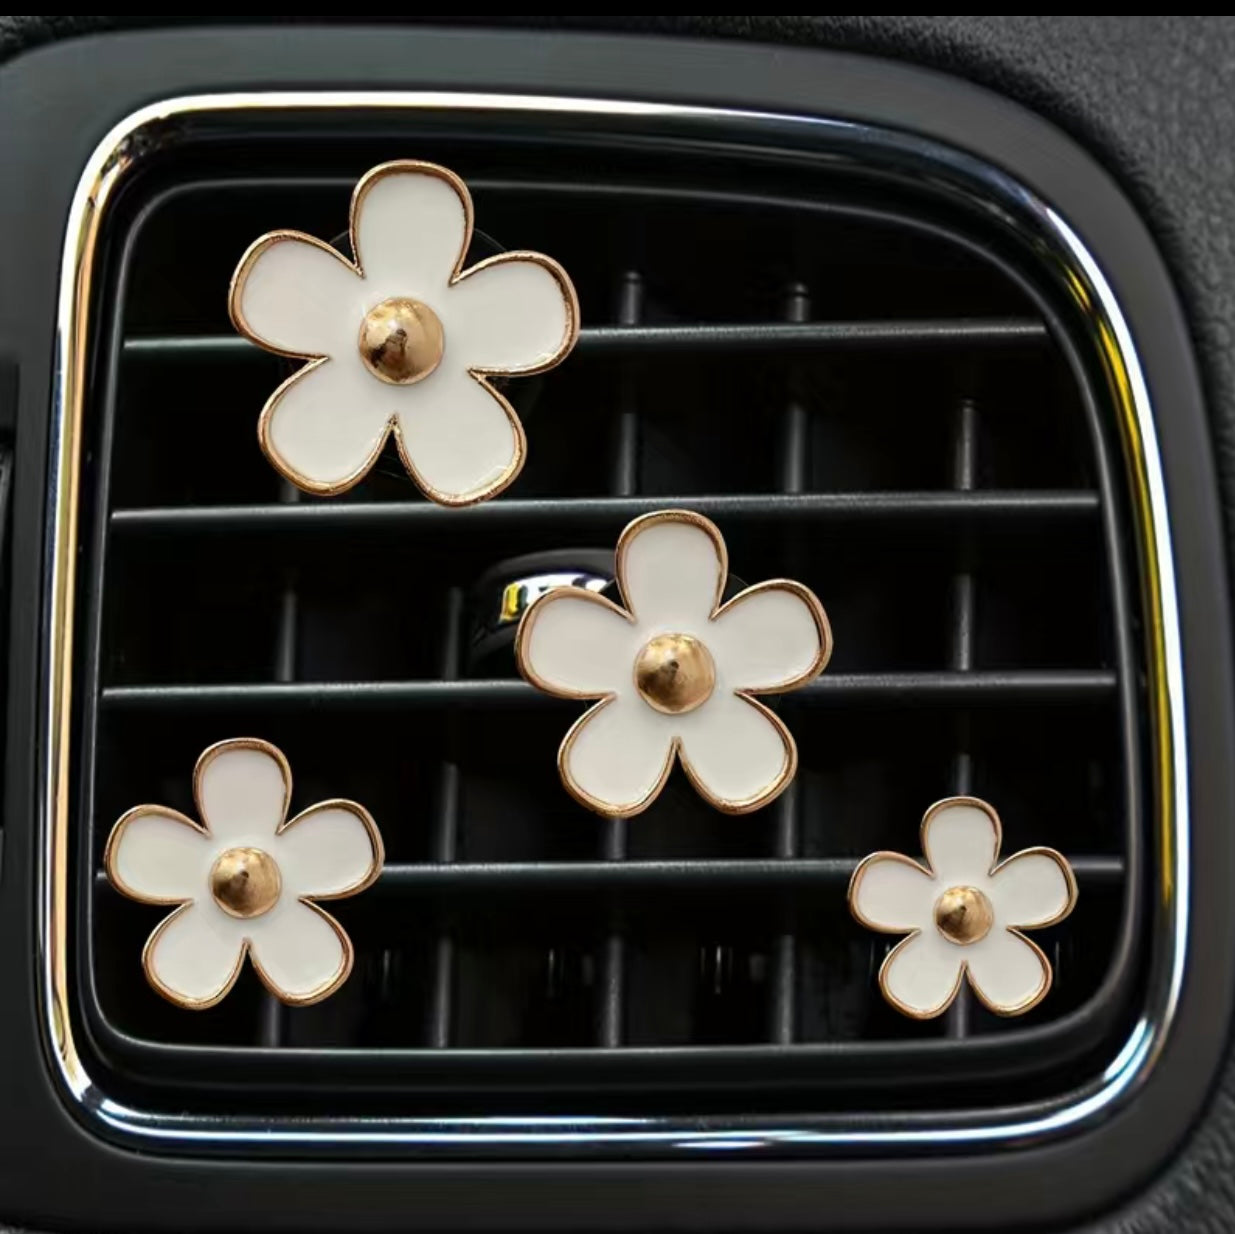 Flower Power Car Clips with scented tablets